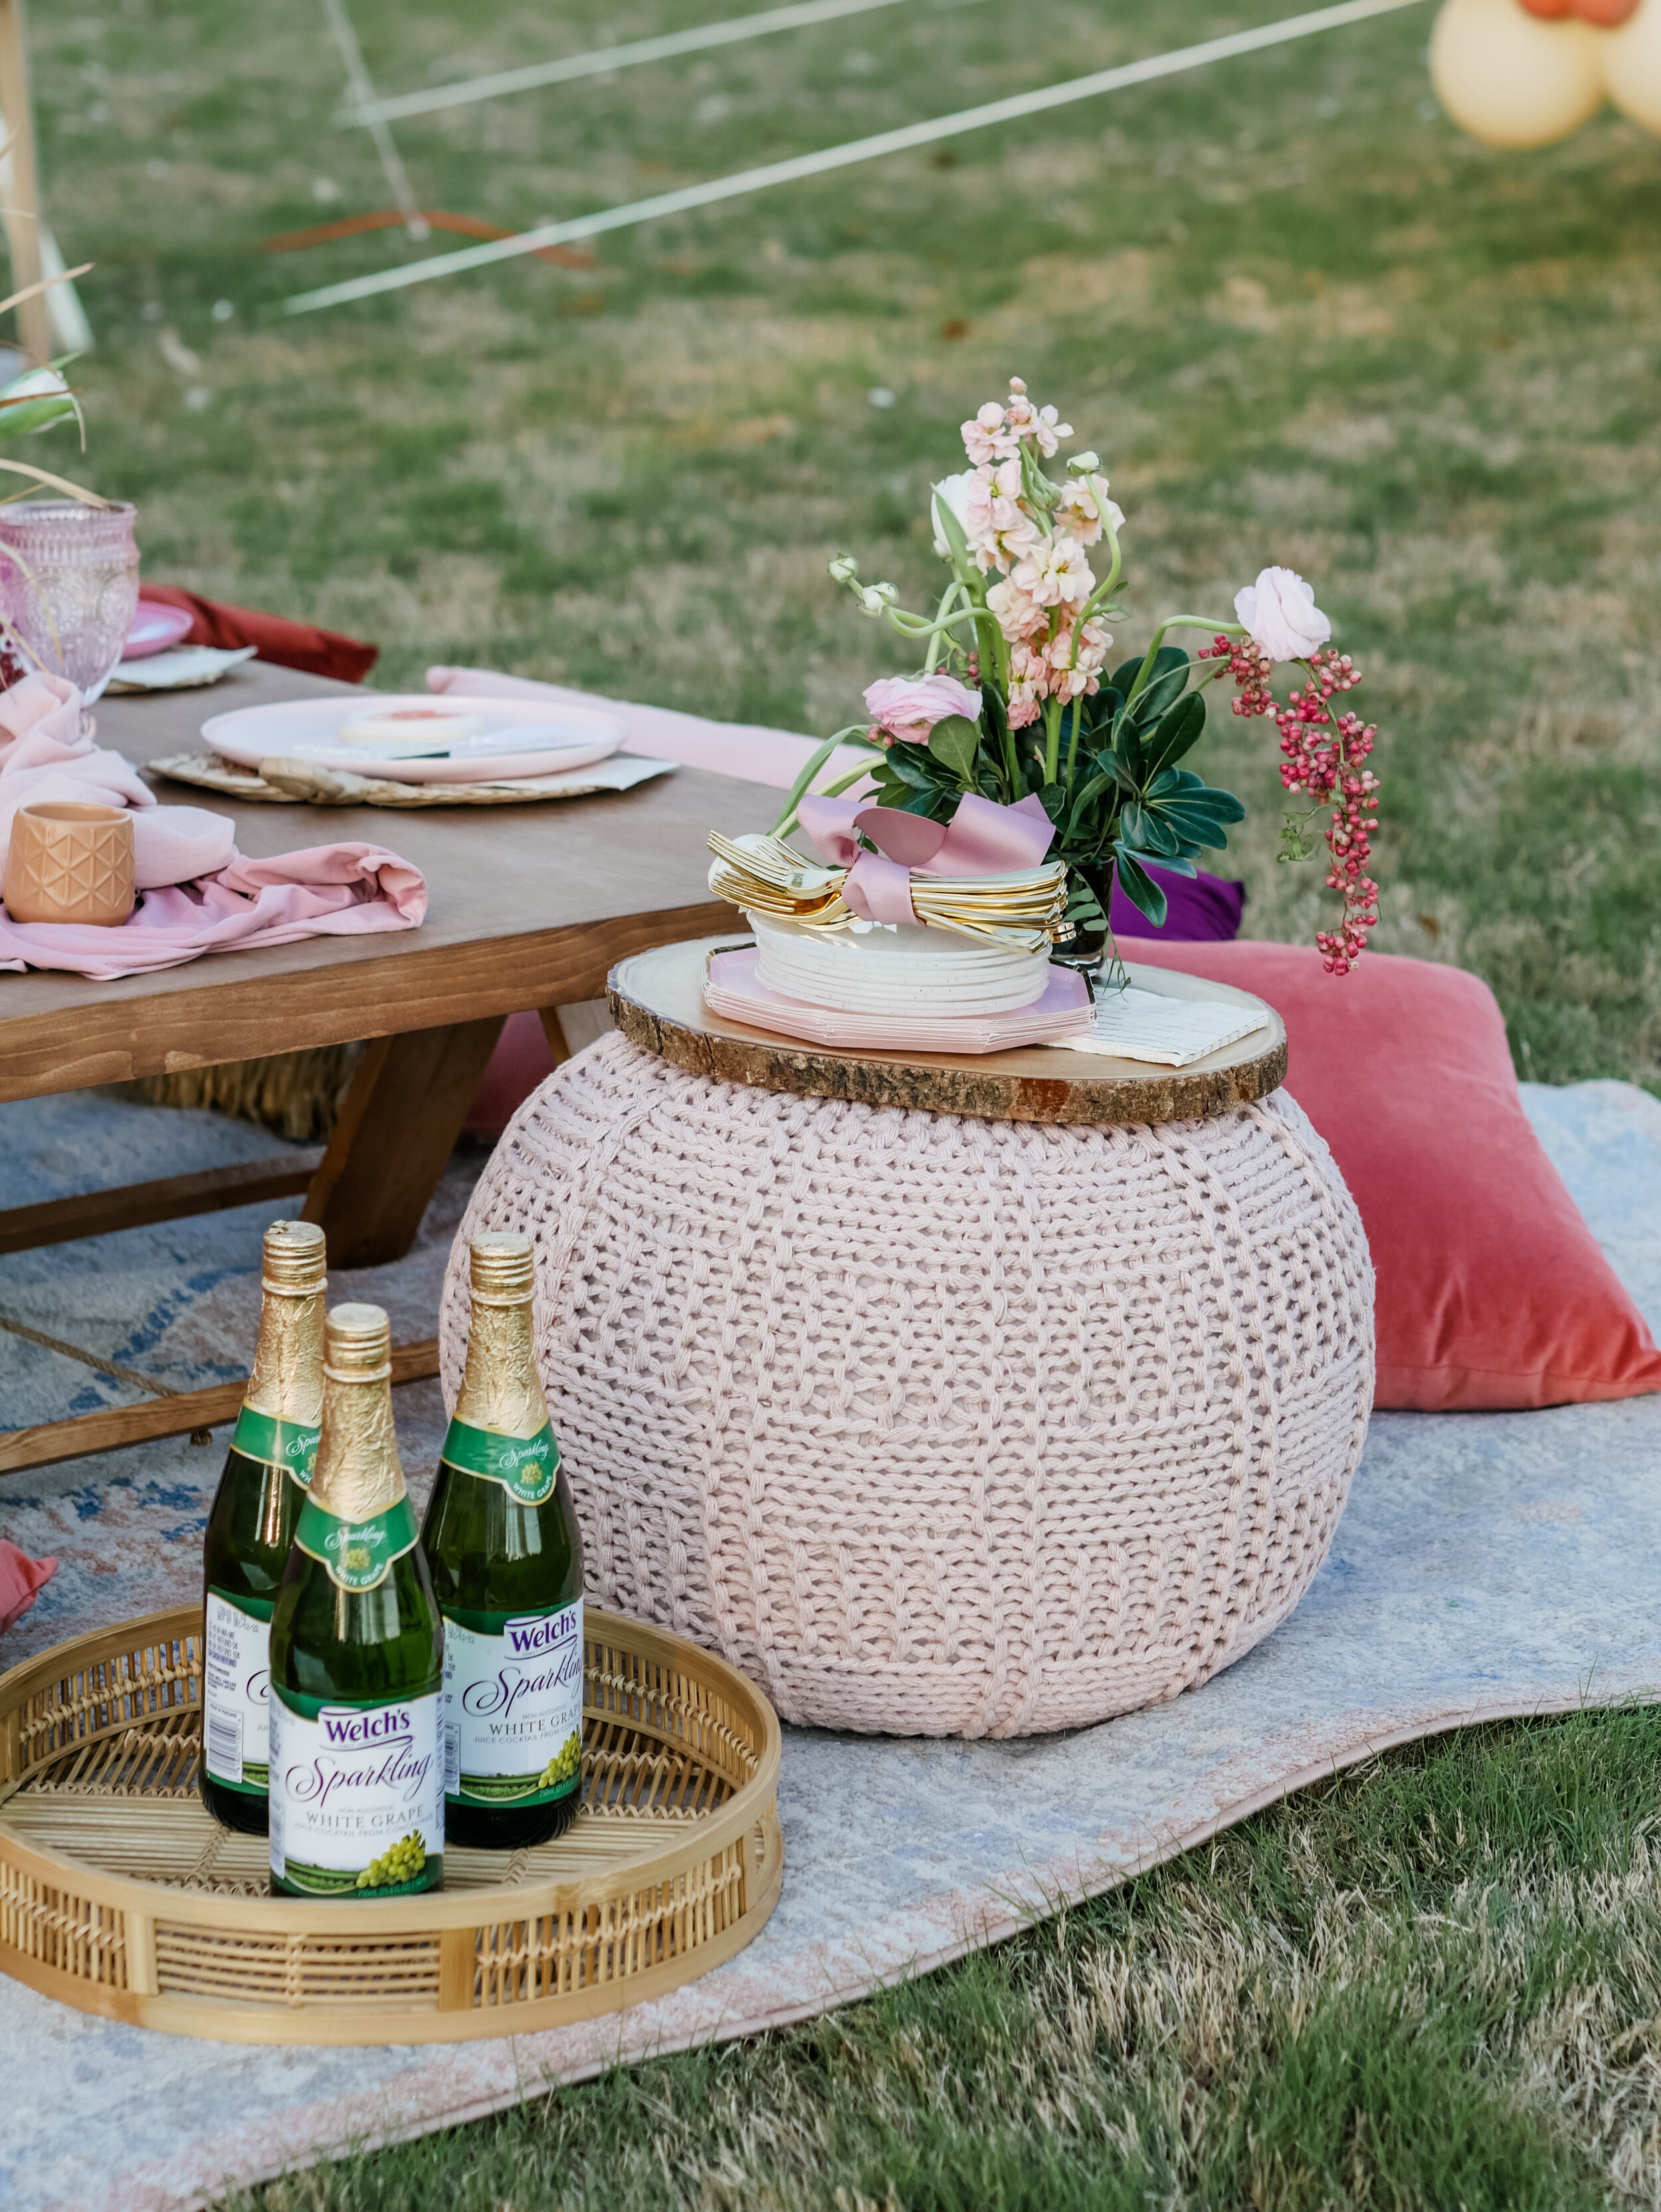  Boho Chic Table Setting for a luxury backyard Glamping experience - with large rentable tent and picnic area from MINT Event Design in Austin, TX! Perfect for teen slumber parties, birthday parties, or bachelorette parties. See how event designer Ca